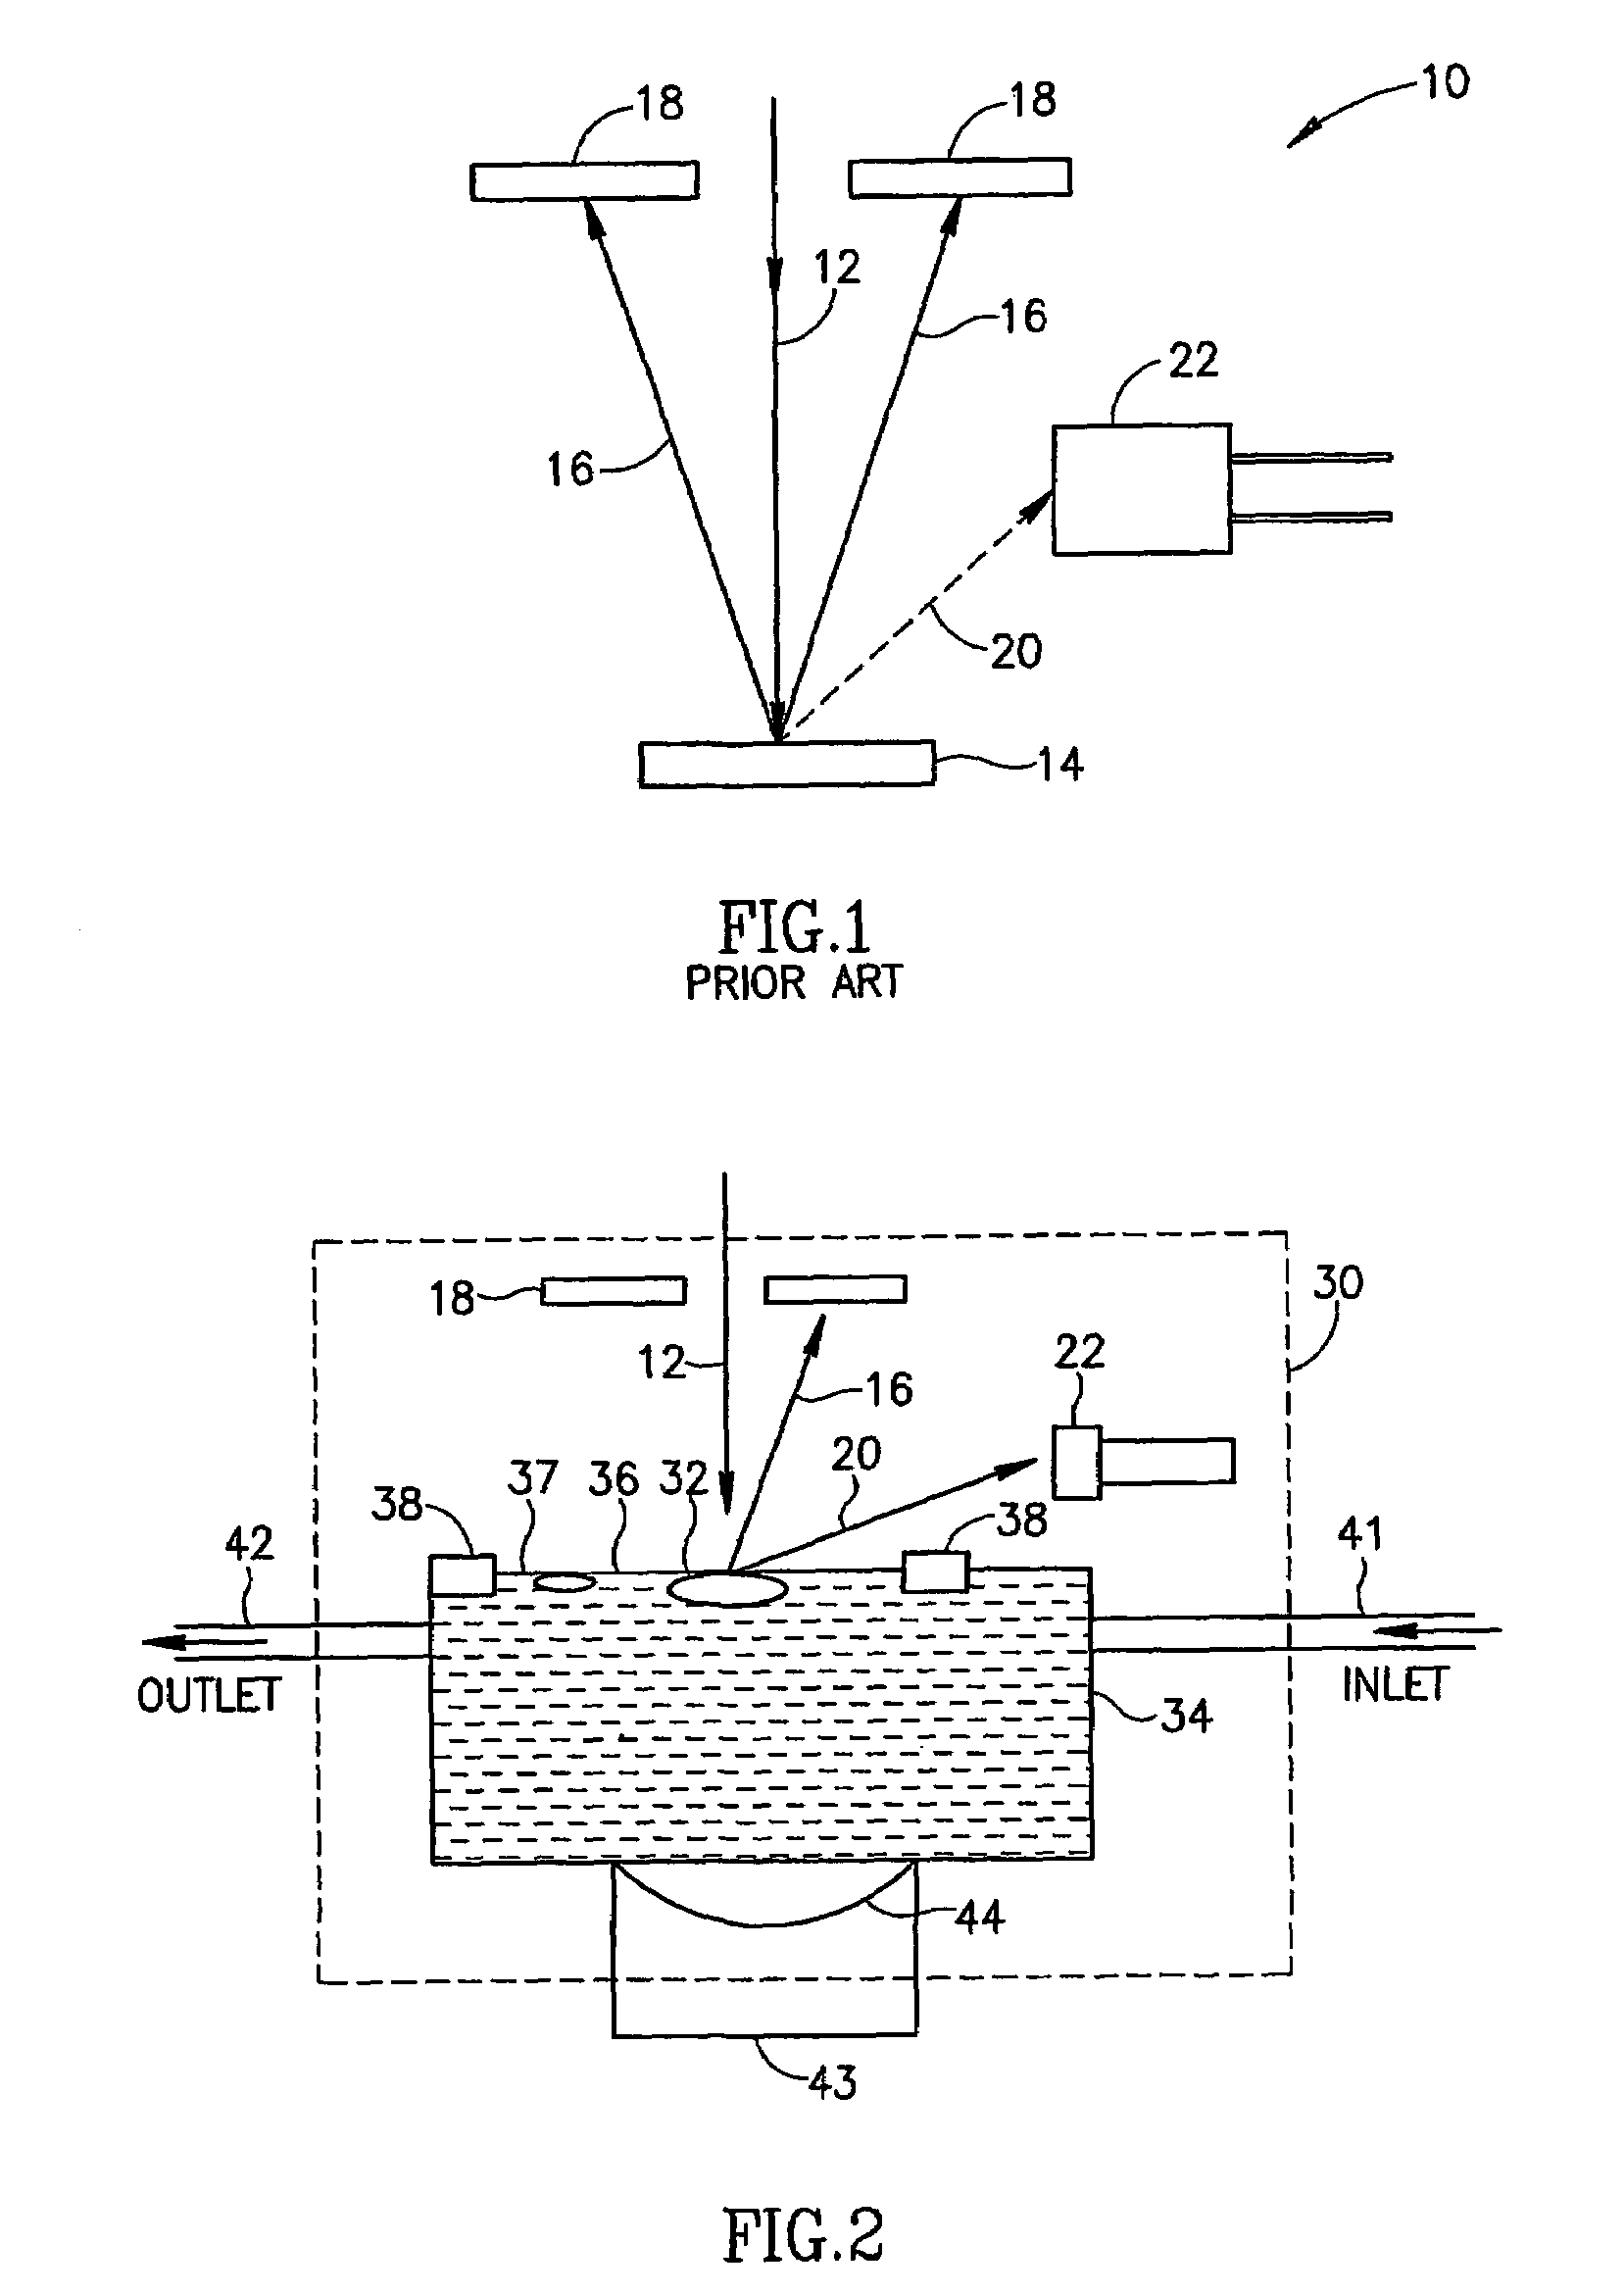 Device and method for the examination of samples in a non-vacuum environment using a scanning electron microscope